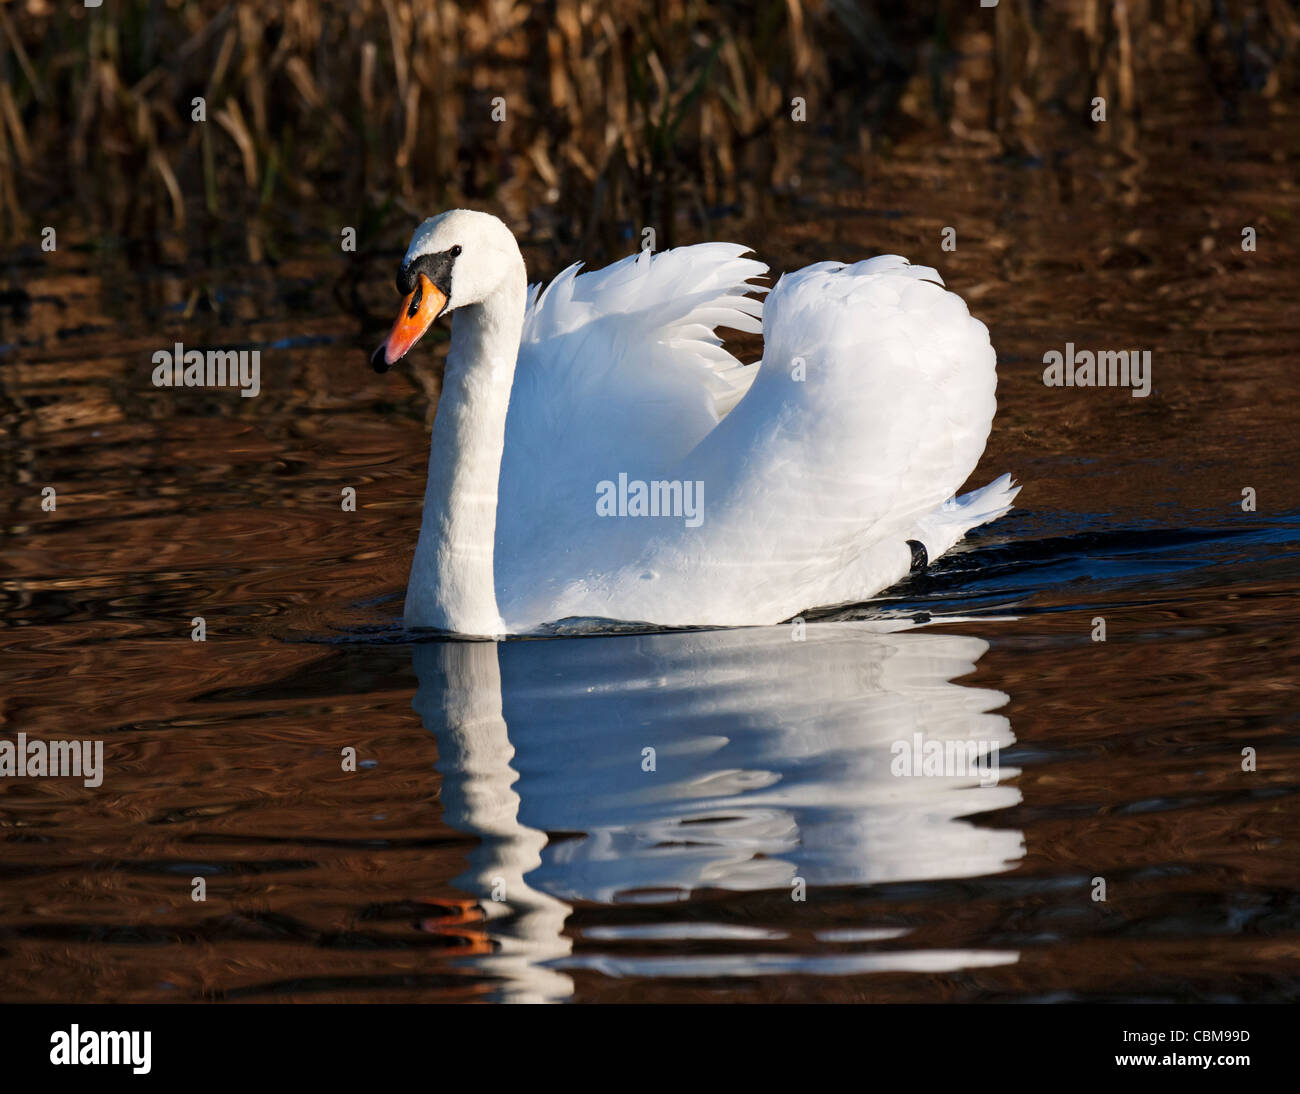 A mute swan swimming in the Forth and Clyde canal, Scotland. Stock Photo